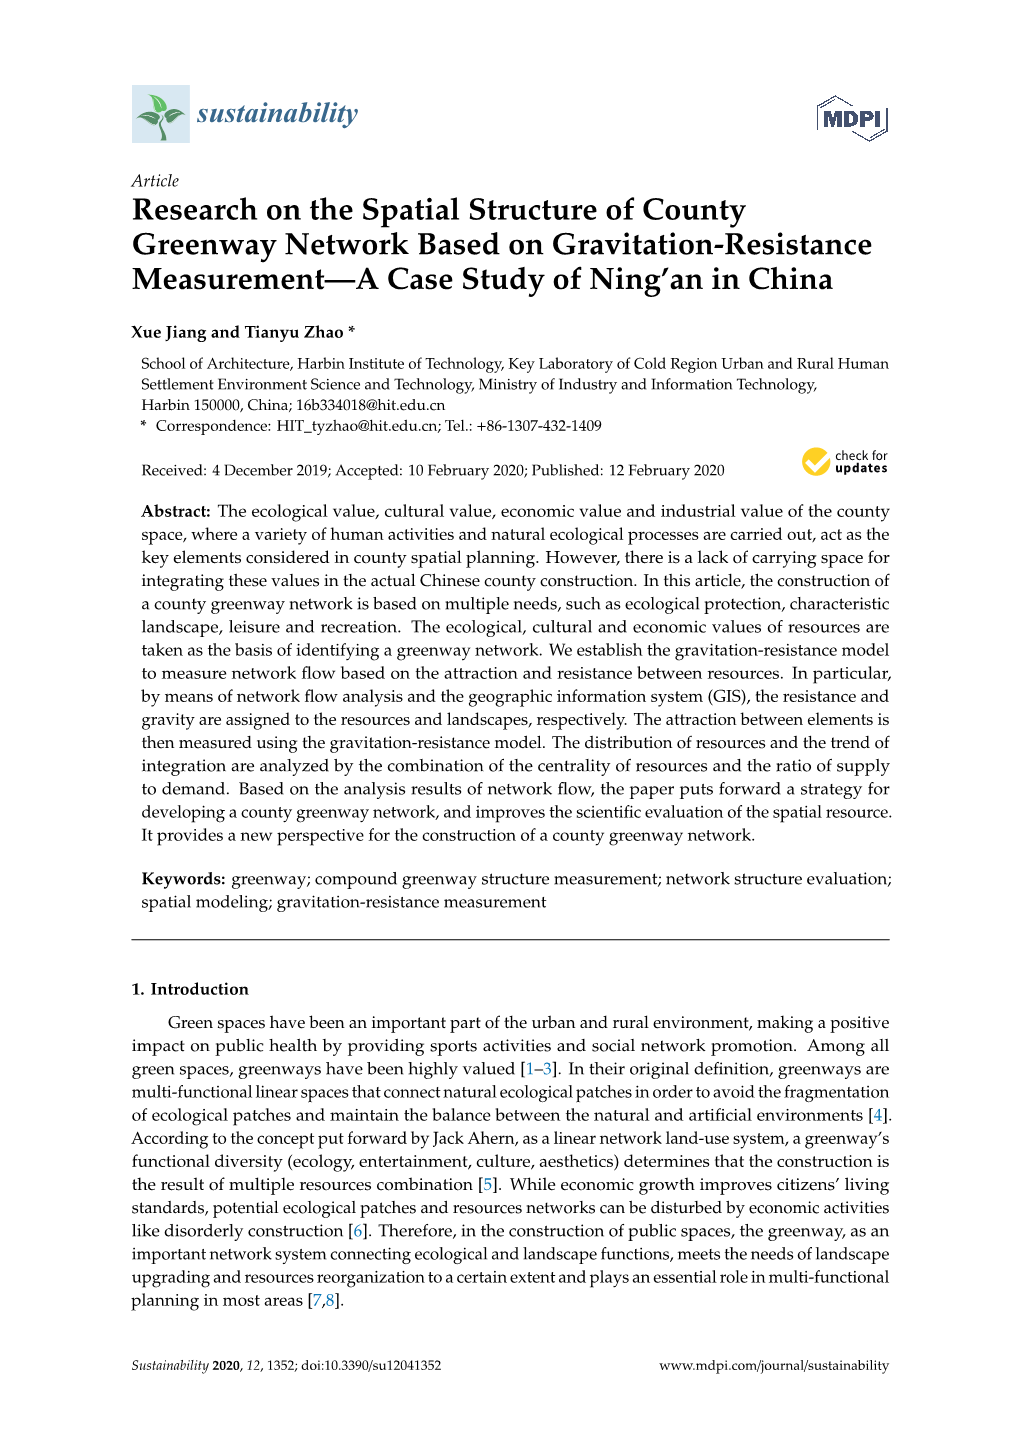 Research on the Spatial Structure of County Greenway Network Based on Gravitation-Resistance Measurement—A Case Study of Ning’An in China